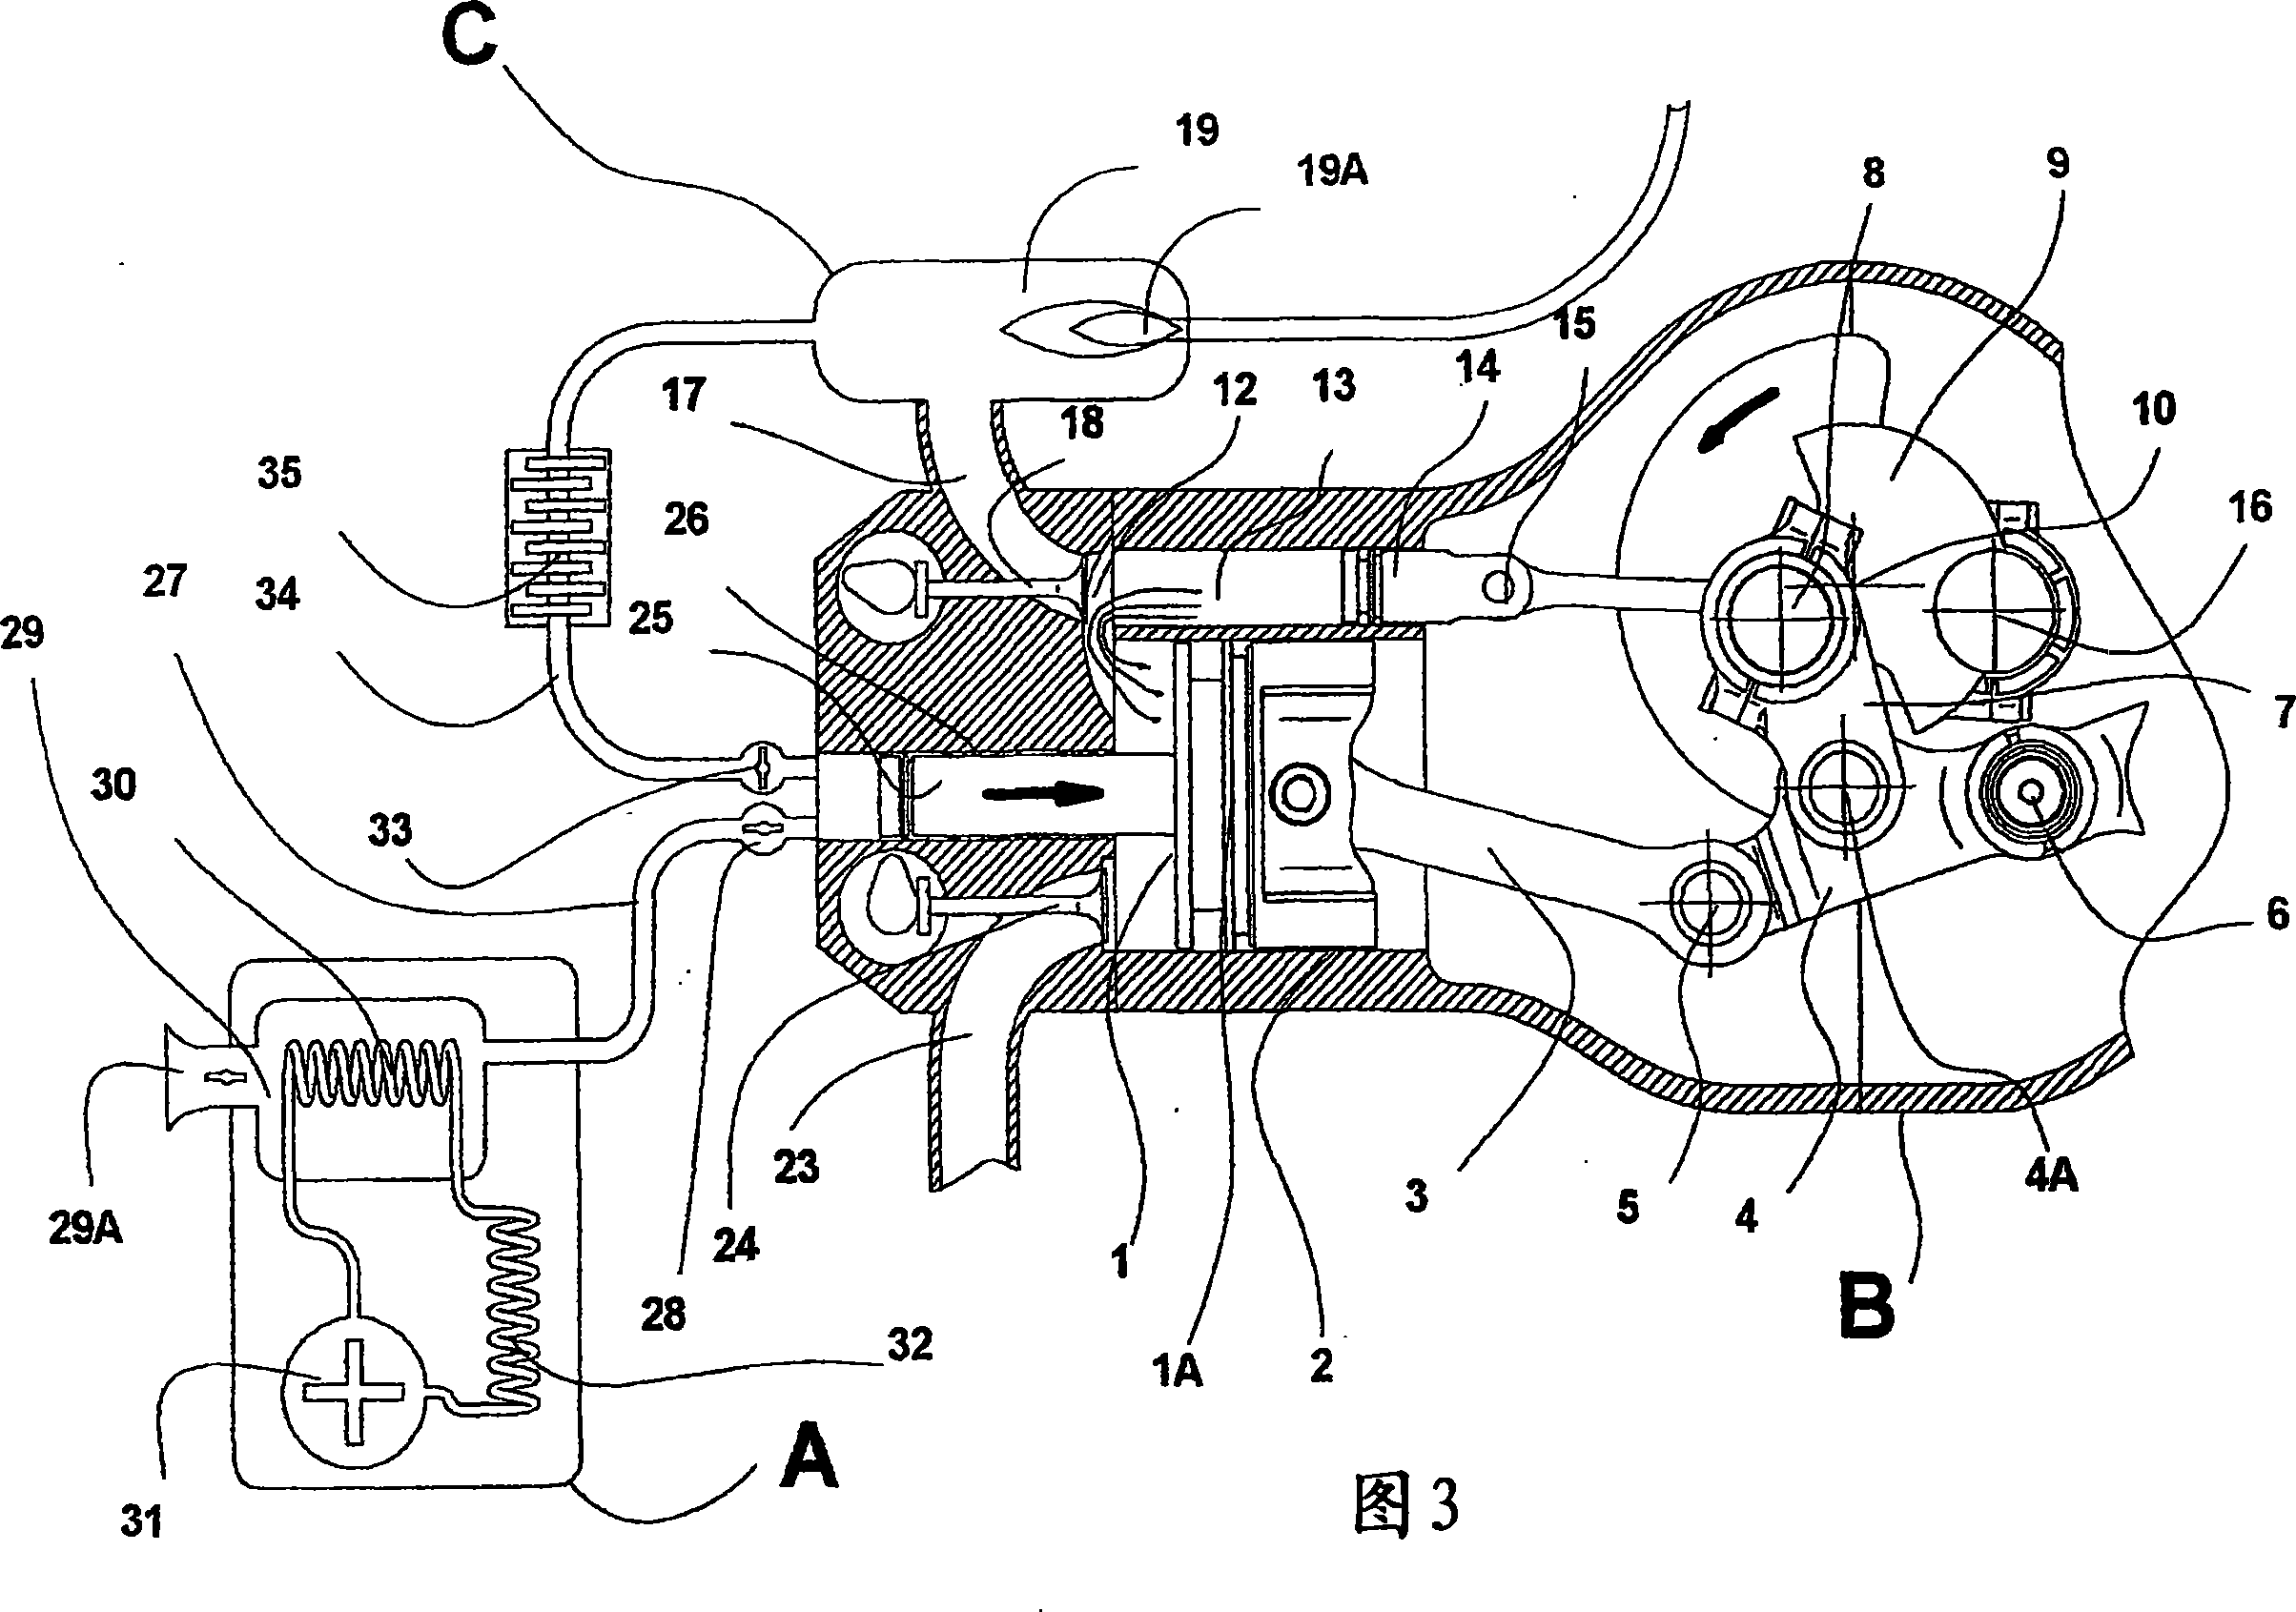 Low-temperature motor compressor unit with continuous 'cold' combustion at constant pressure and with active chamber